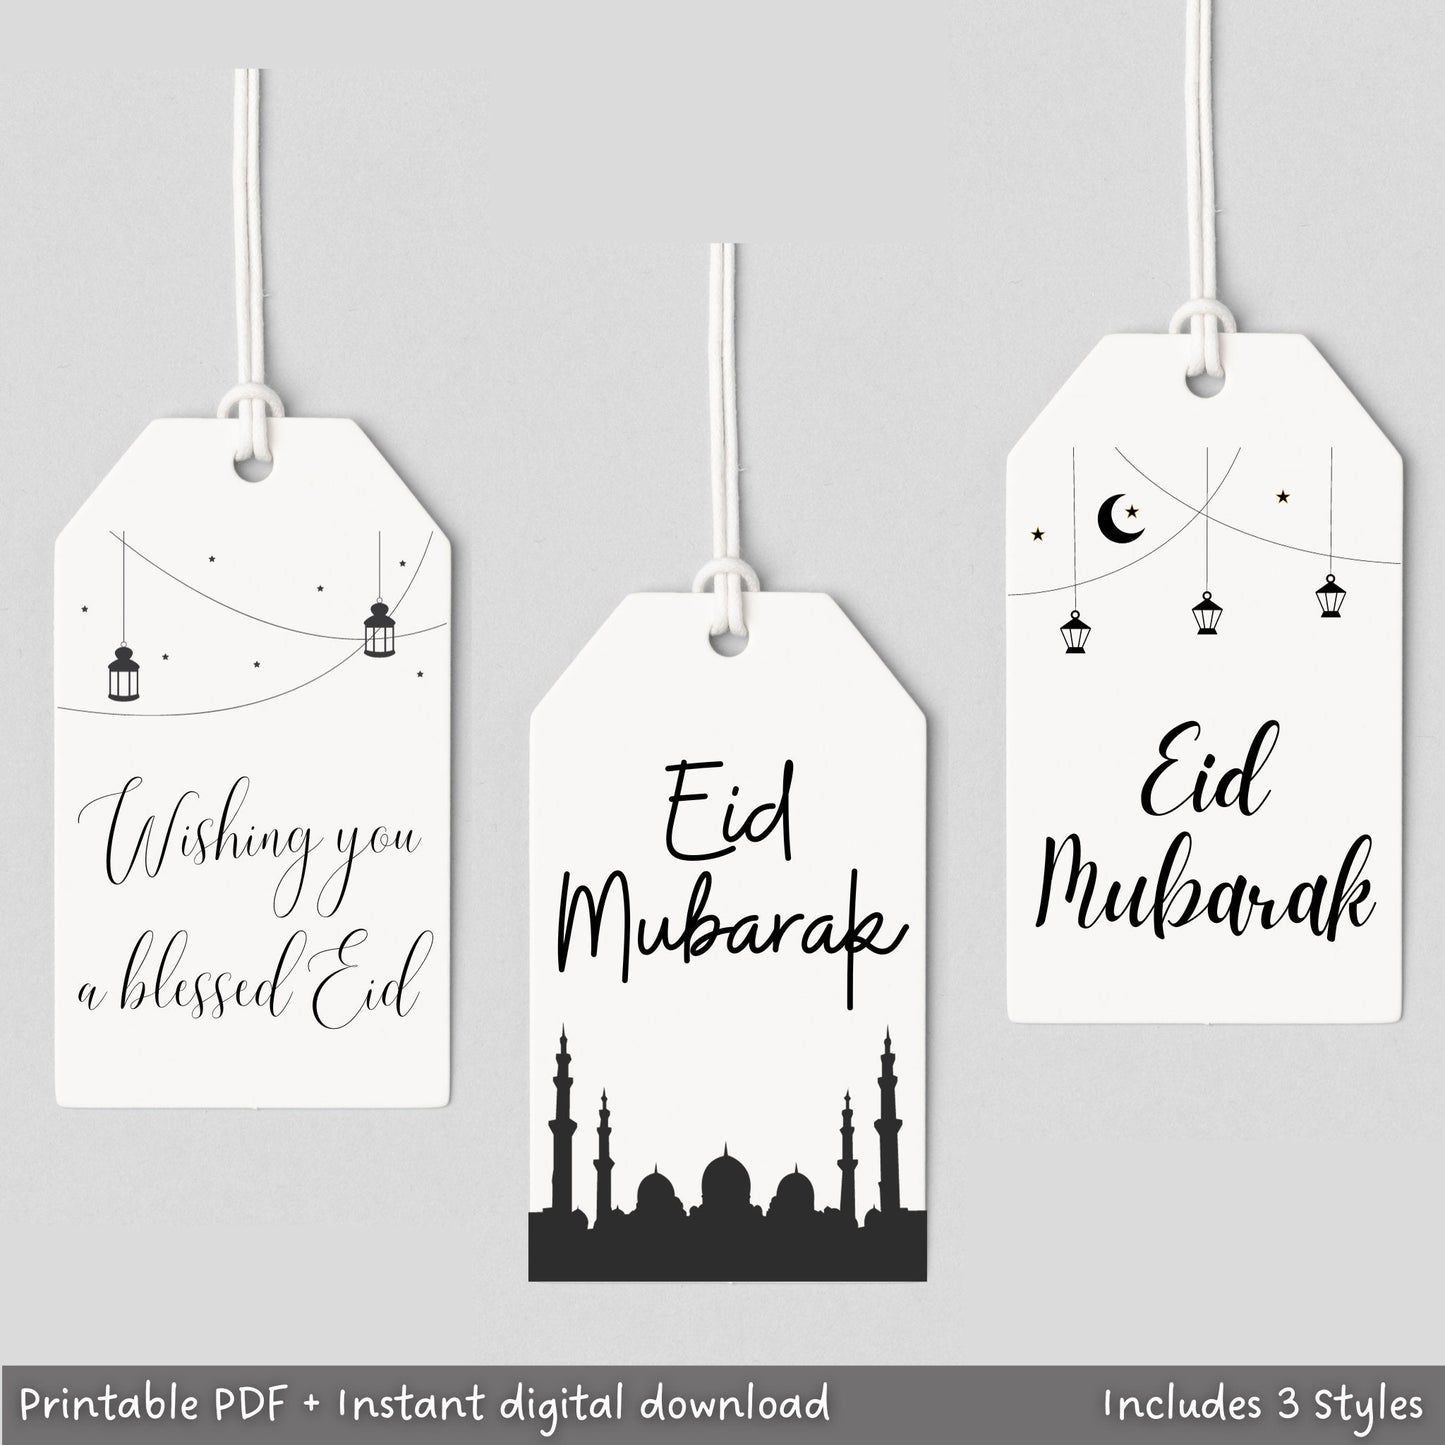 Make gift giving extra special with these printable simplistic and modern digital Eid Mubarak gift tags! Includes 3 different styles that are minimalistic! Simply purchase, download, print and gift away!